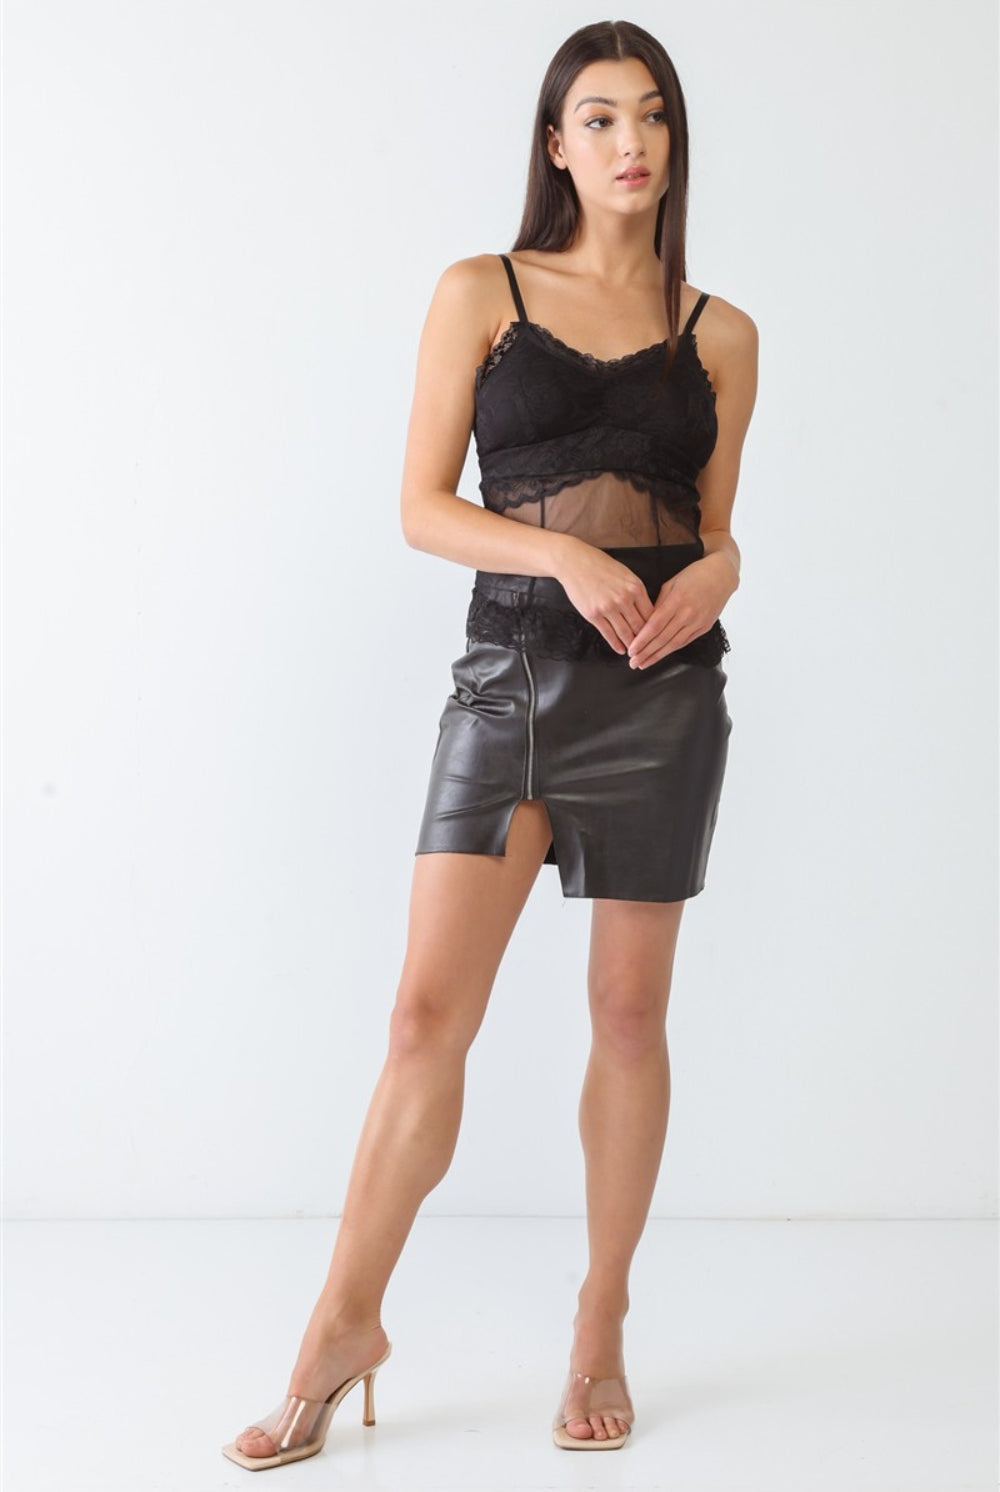 A woman models a sophisticated black lace bustier top with sheer panel detailing, epitomizing modern elegance.